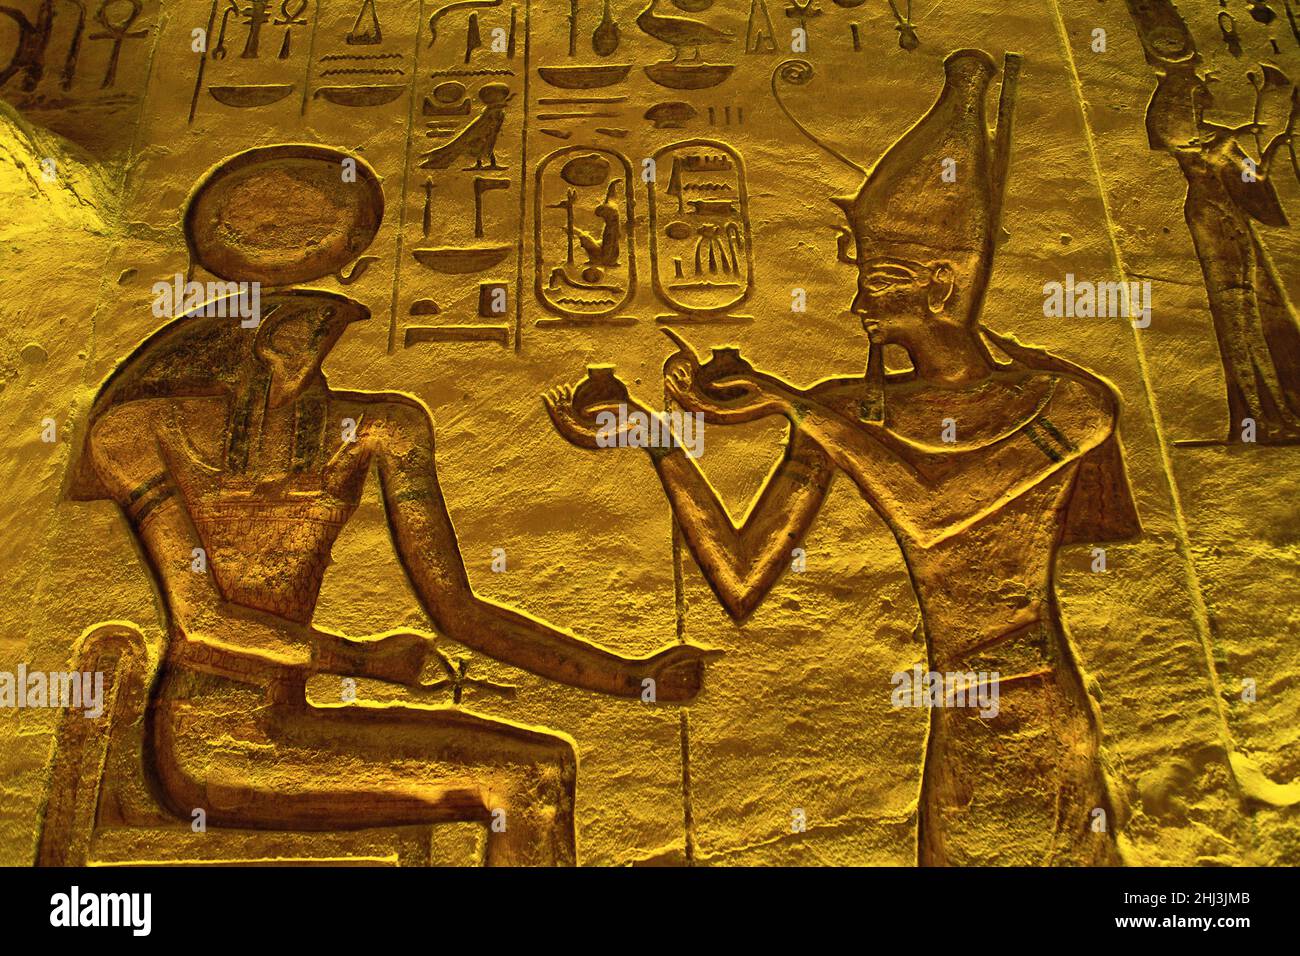 Reliefs inside the Great Temple of Ramesses II, Abu Simbel, Egypt Stock Photo